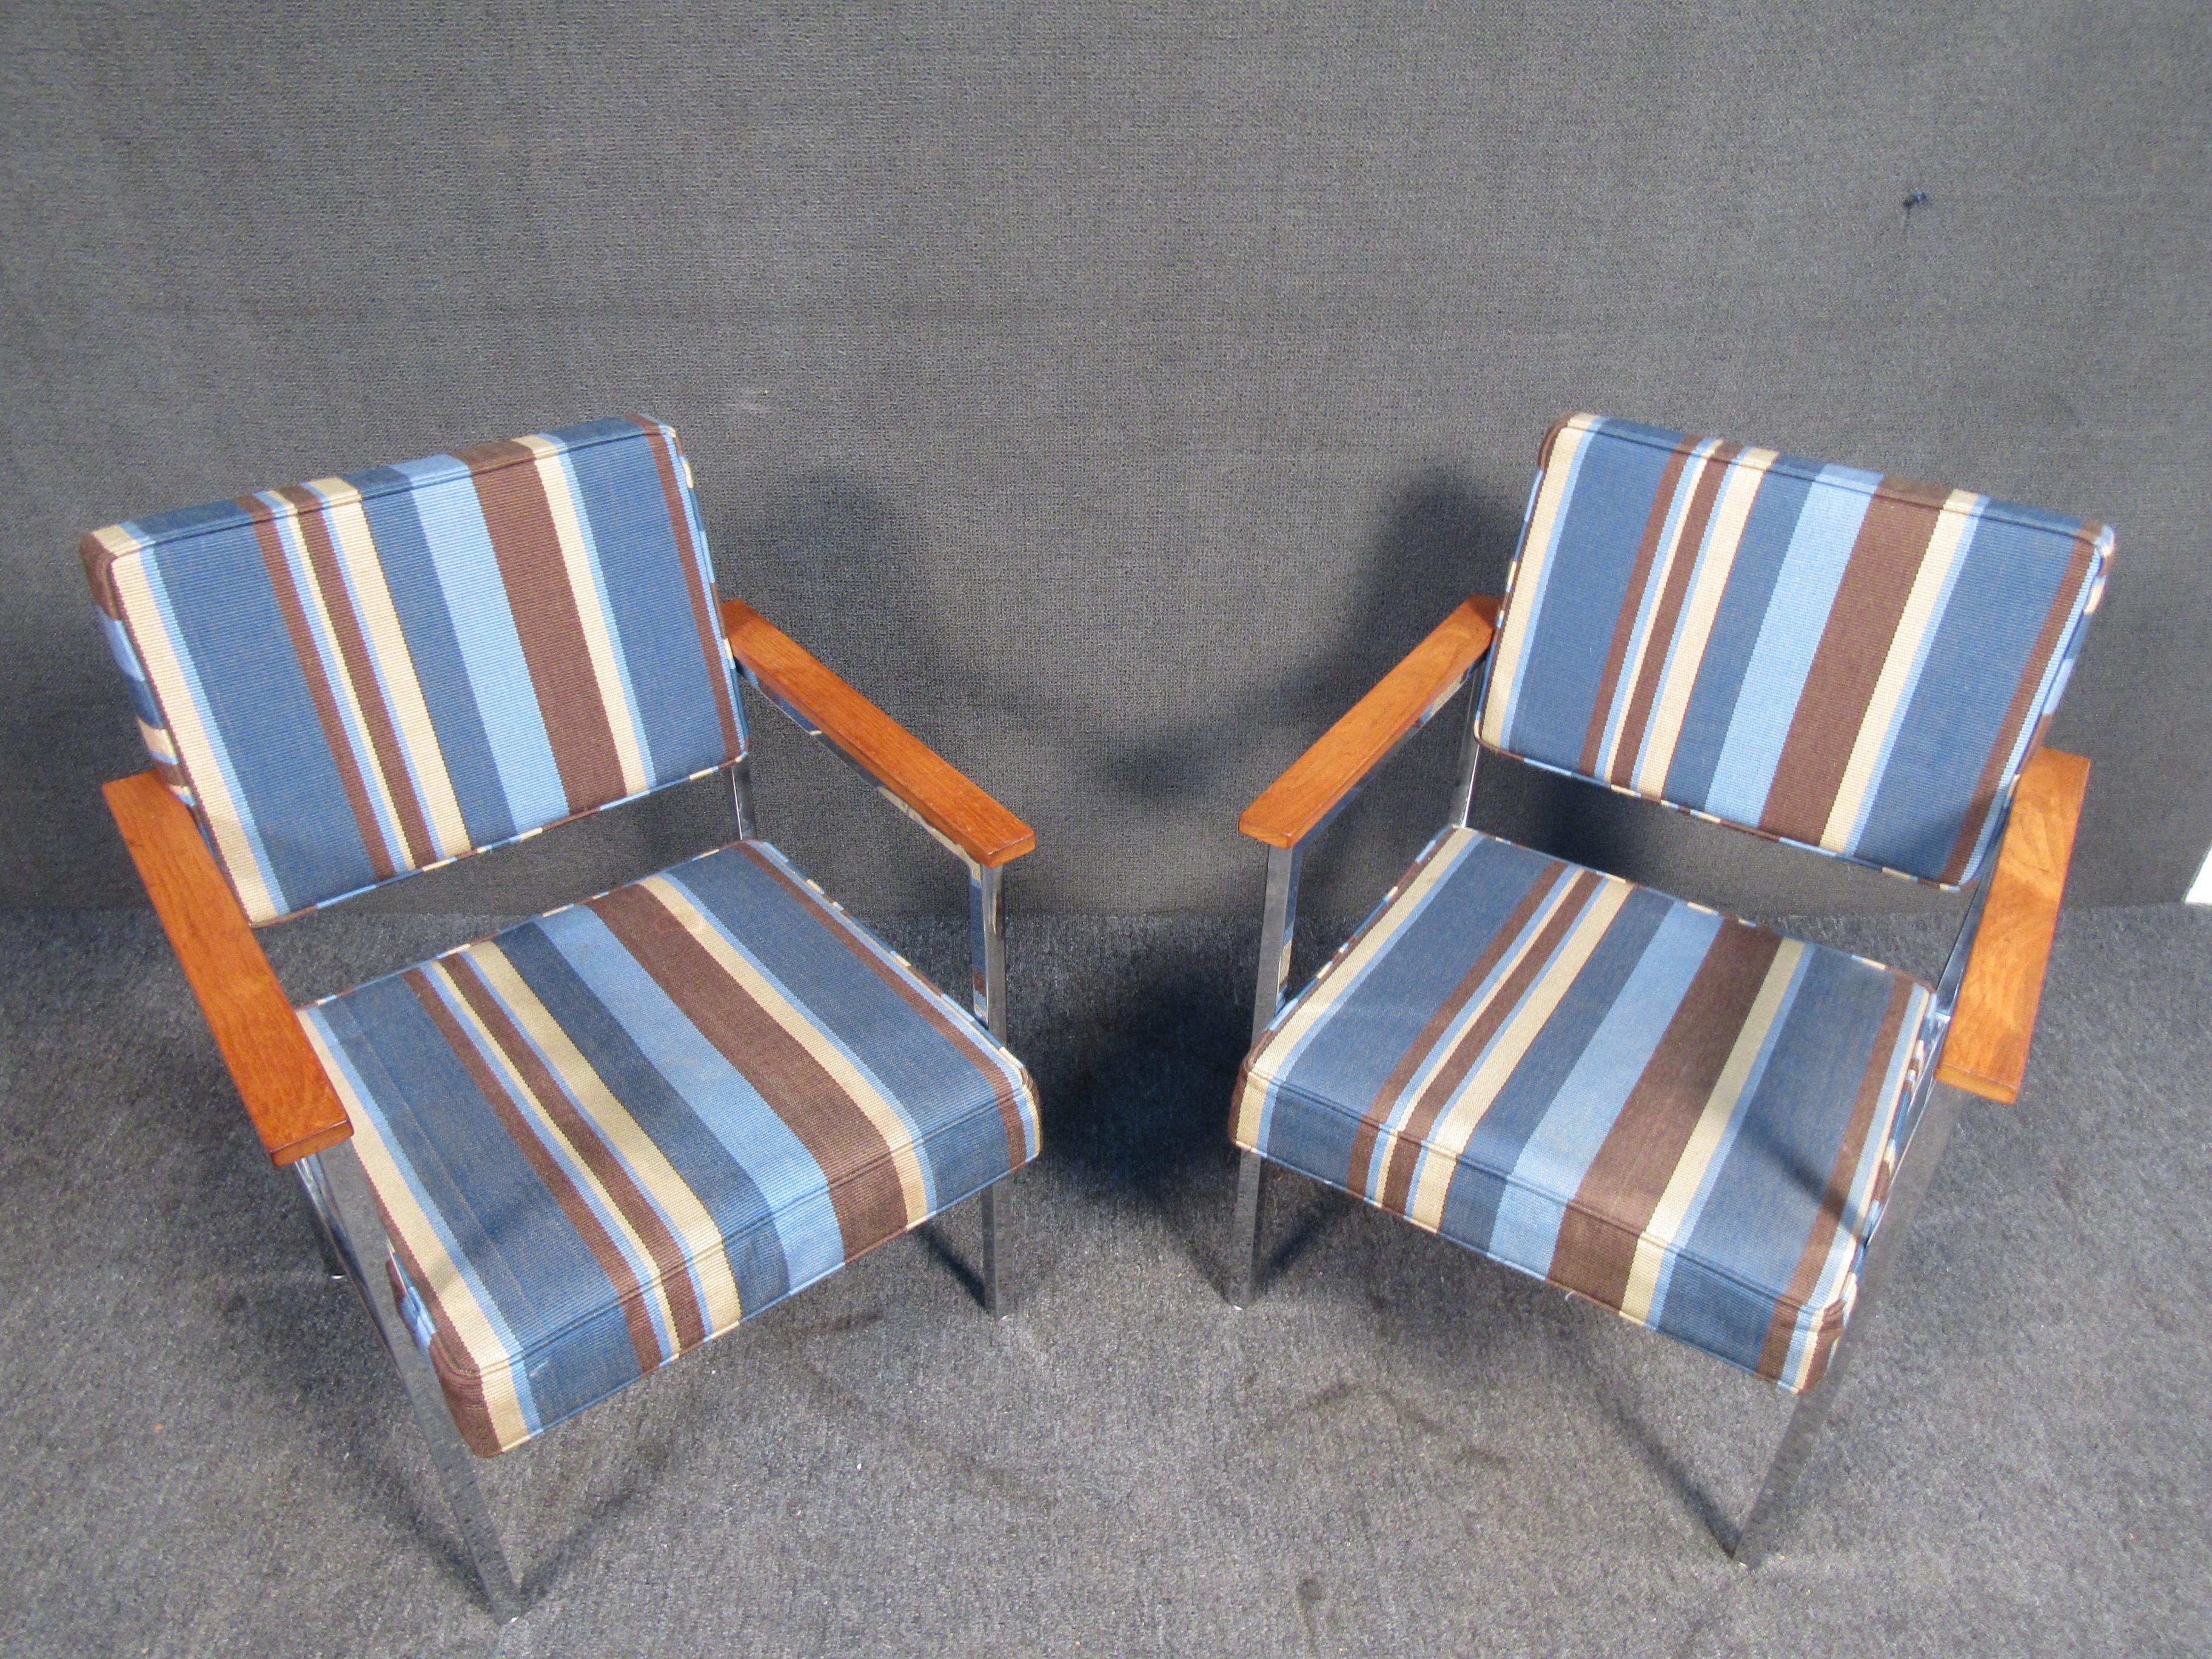 These unique club chairs feature rectangular teak arm rests on a sturdy metal frame. The stripped blue upholstery will compliment any setting you decide to pair them with. 
Please confirm item location with seller (NY/NJ).